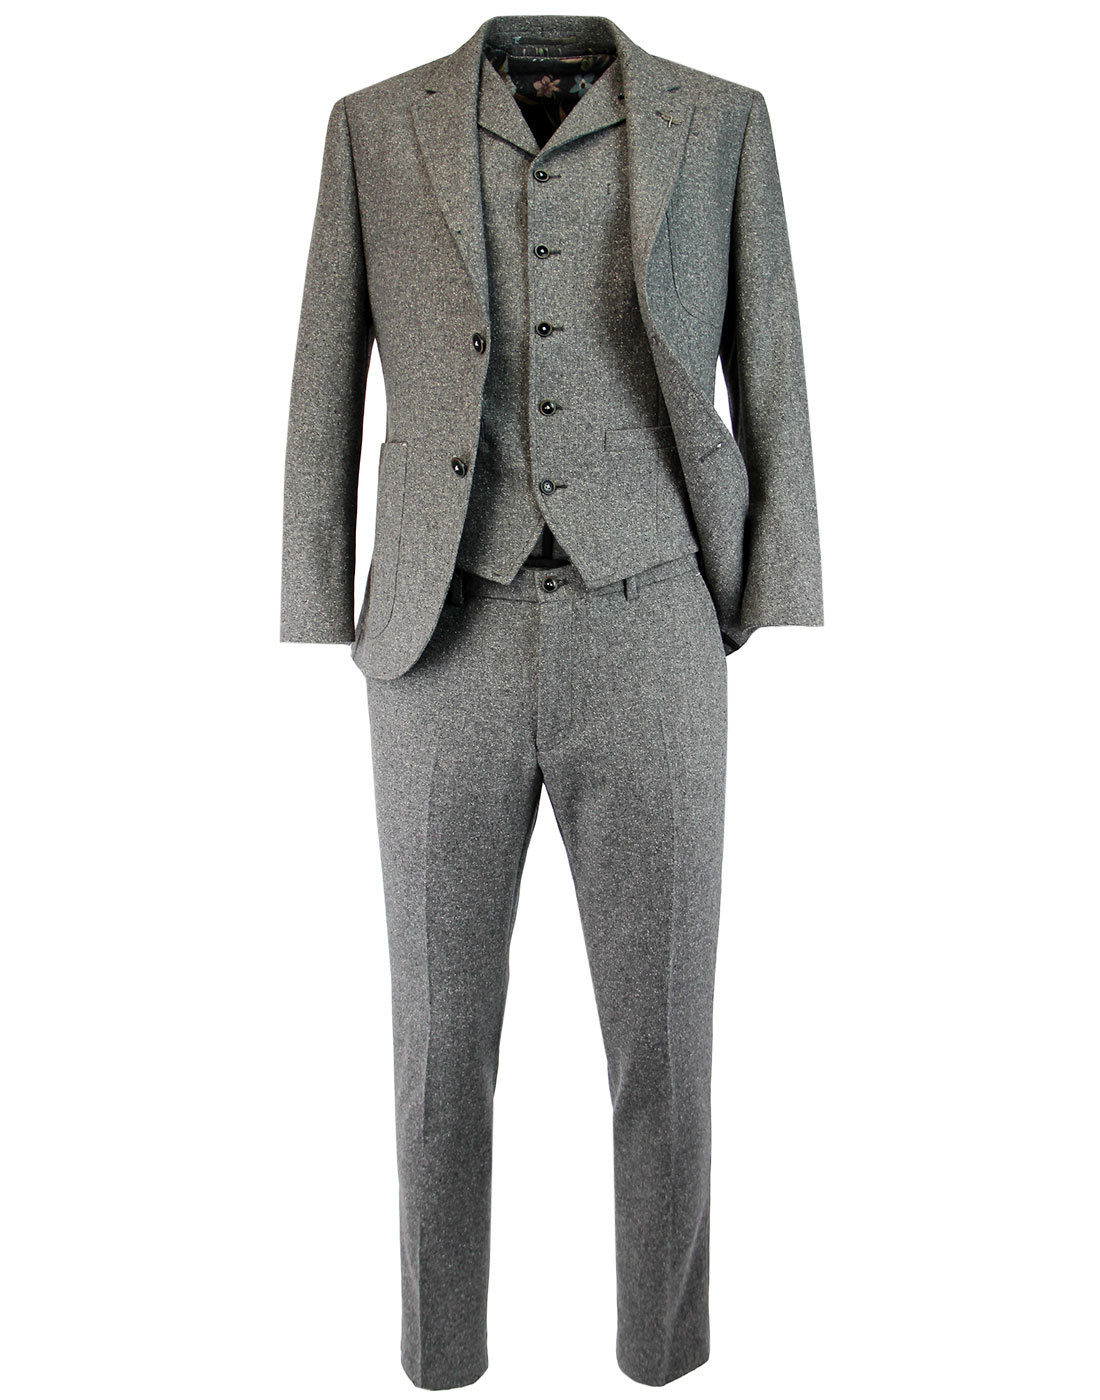 Gibson London Retro 60s Mod 3 Piece Suit in Grey Donegal